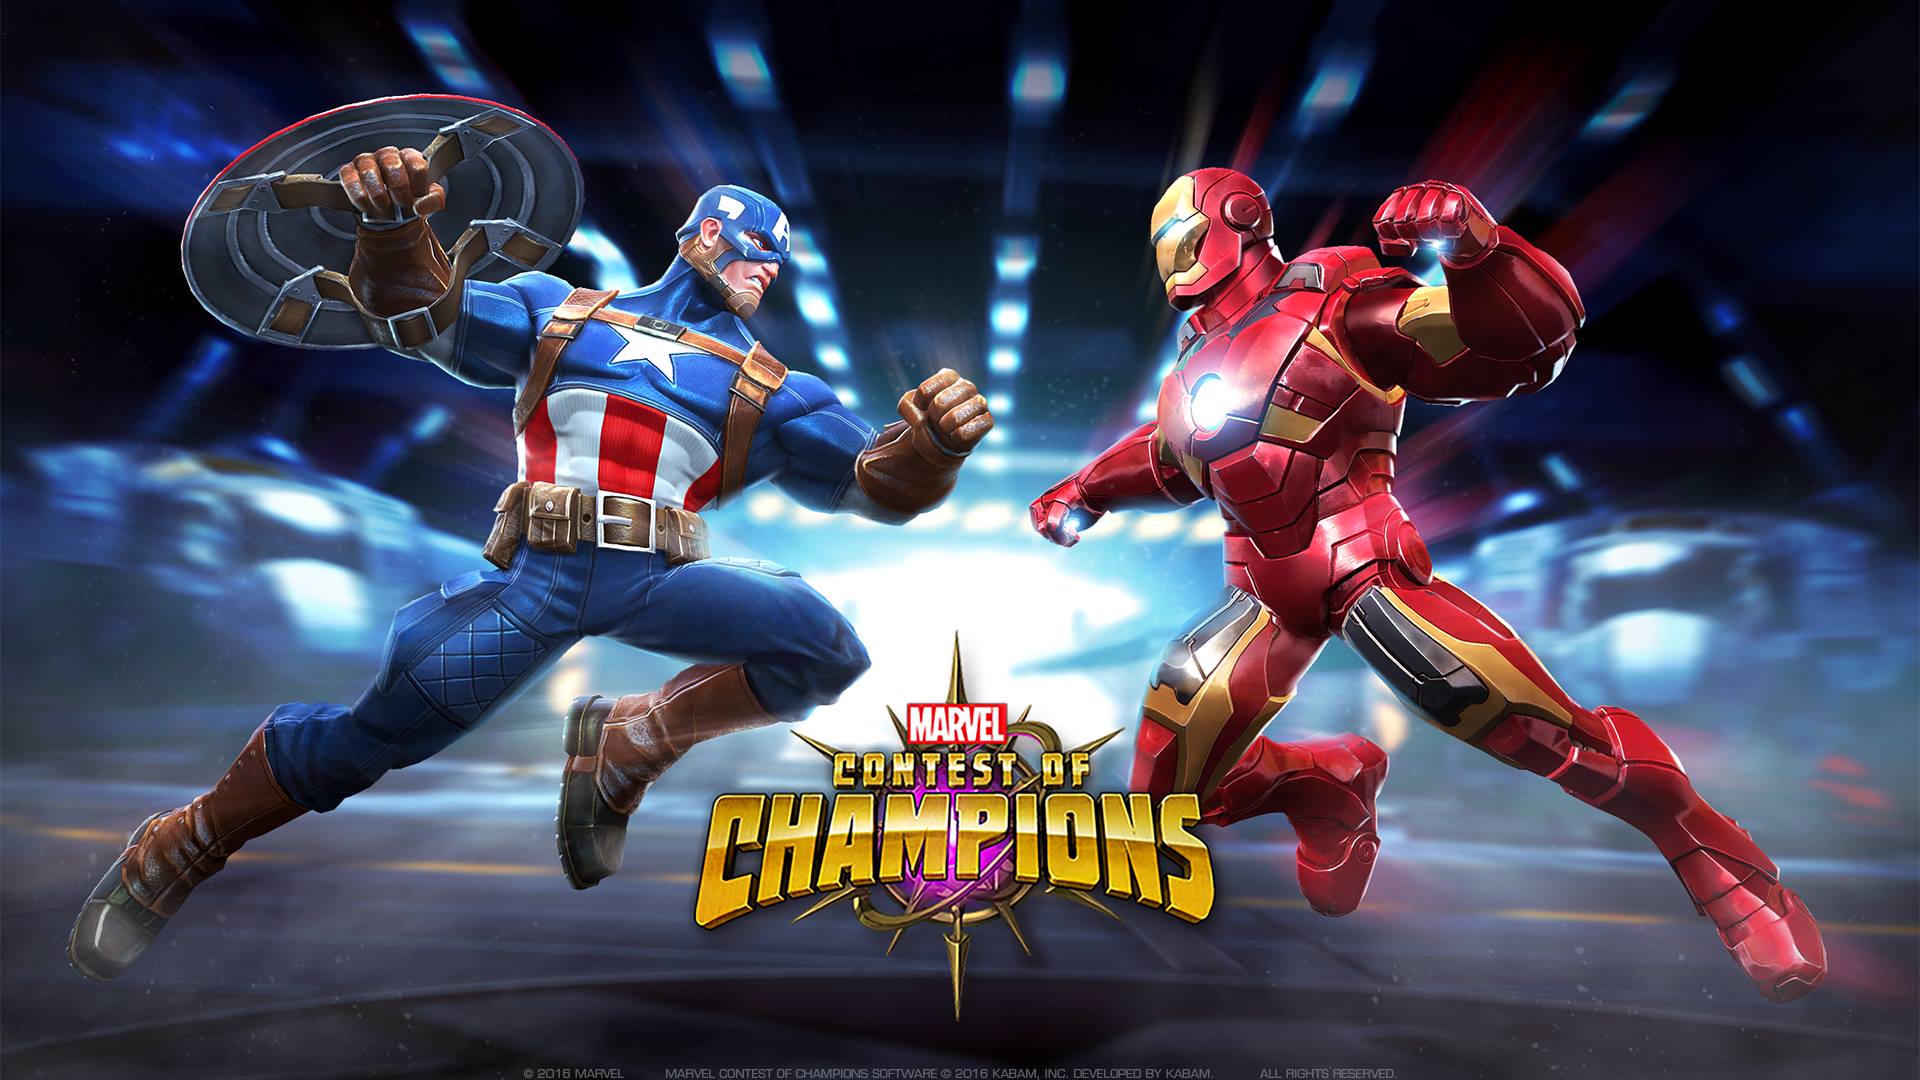 Playable Characters - September 2018 - Marvel Contest of Champions :  r/ContestOfChampions